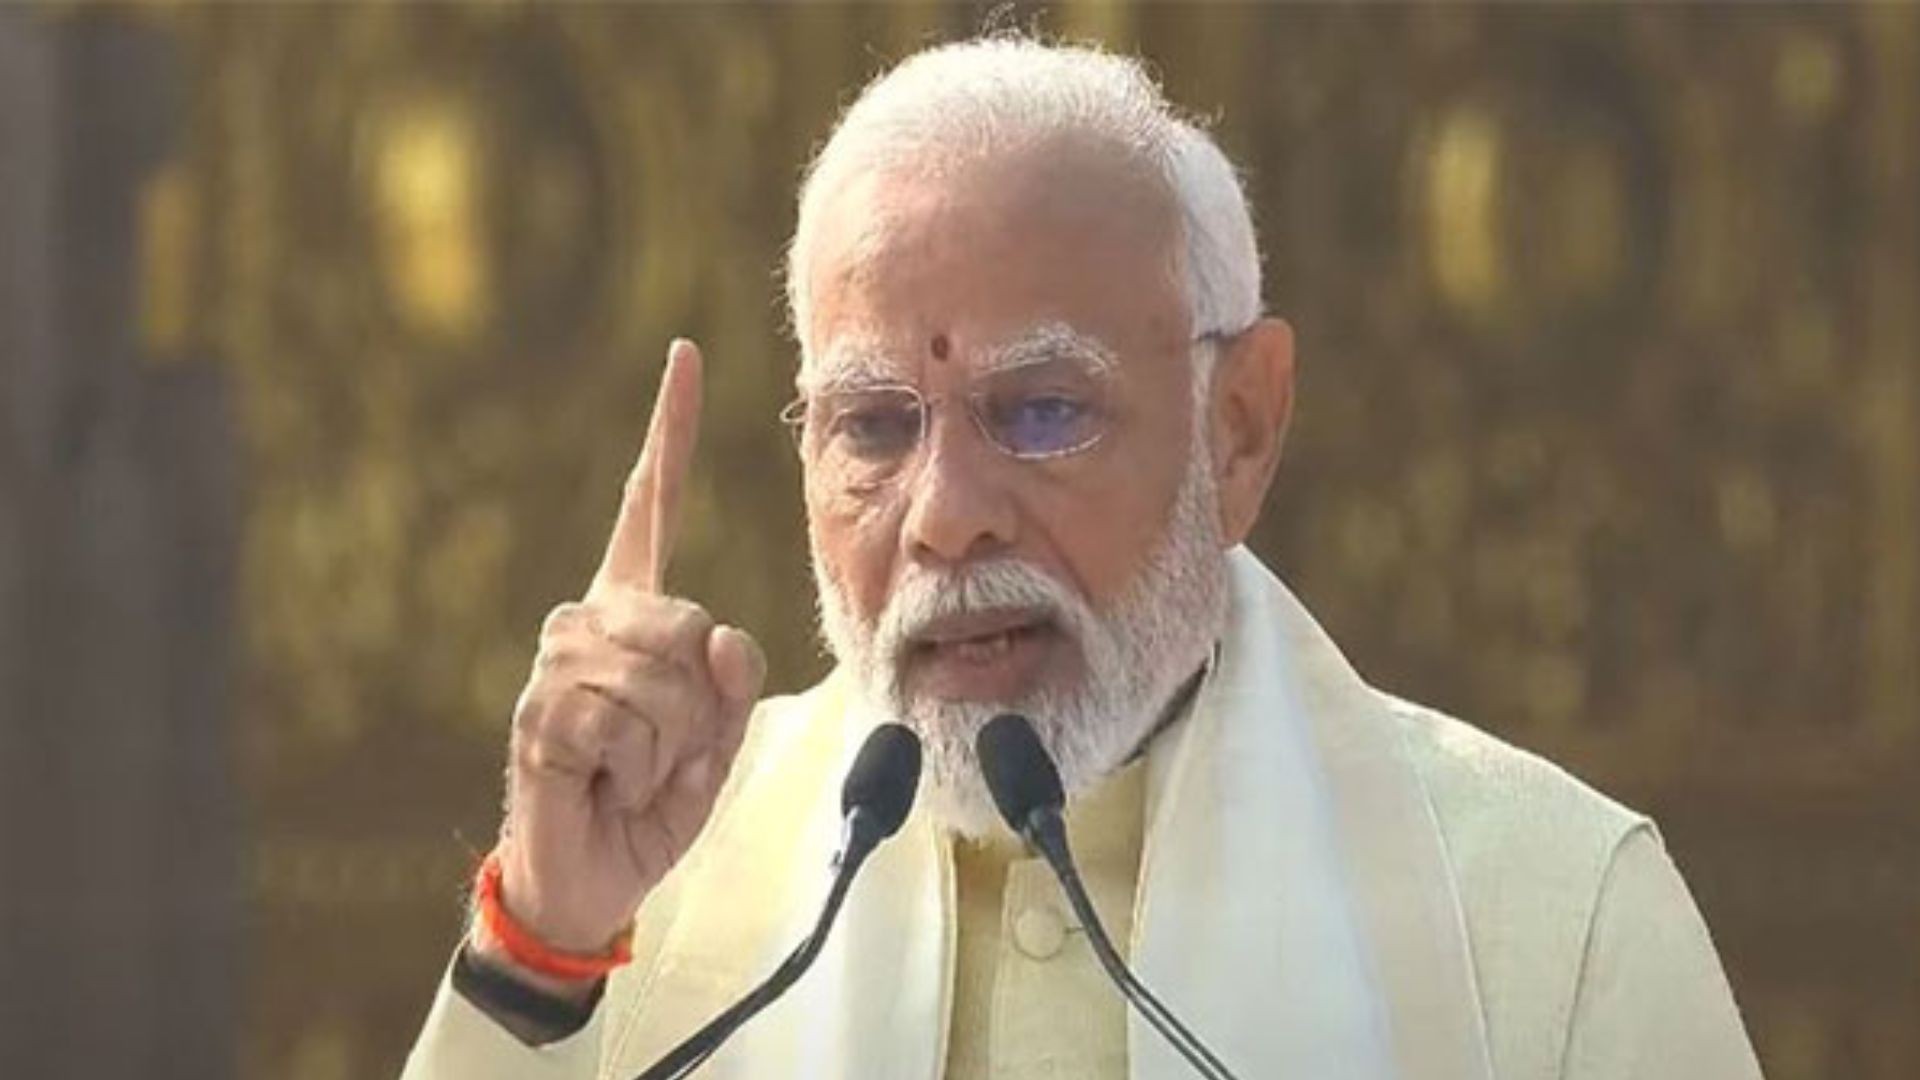 “Ram Temple’s construction is reflection of Indian society’s maturity”: PM Modi